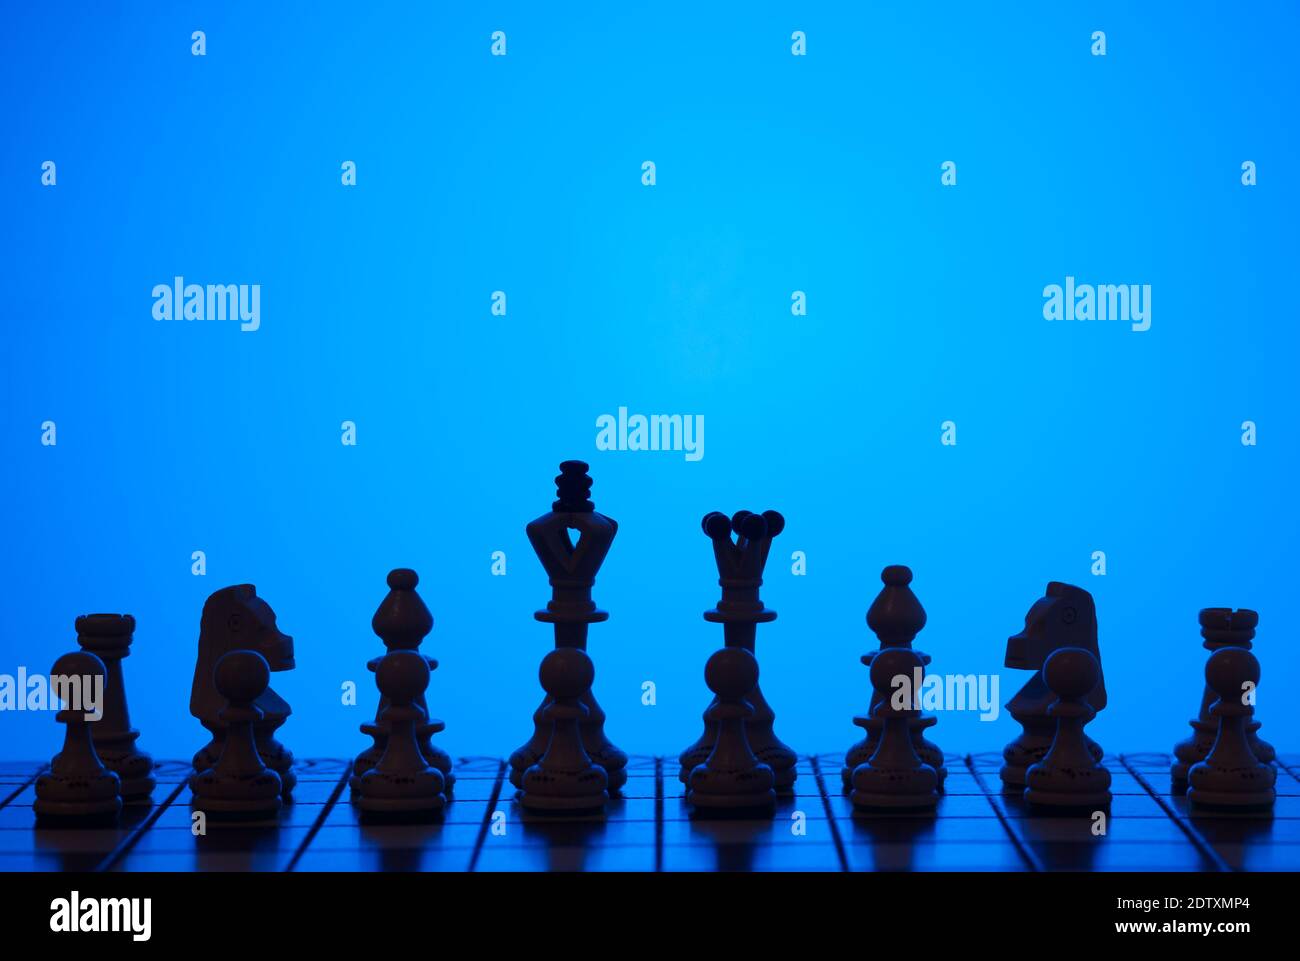 Creative background with chess board and chess figures on the dark blue background. Horizontal orientation. Stock Photo